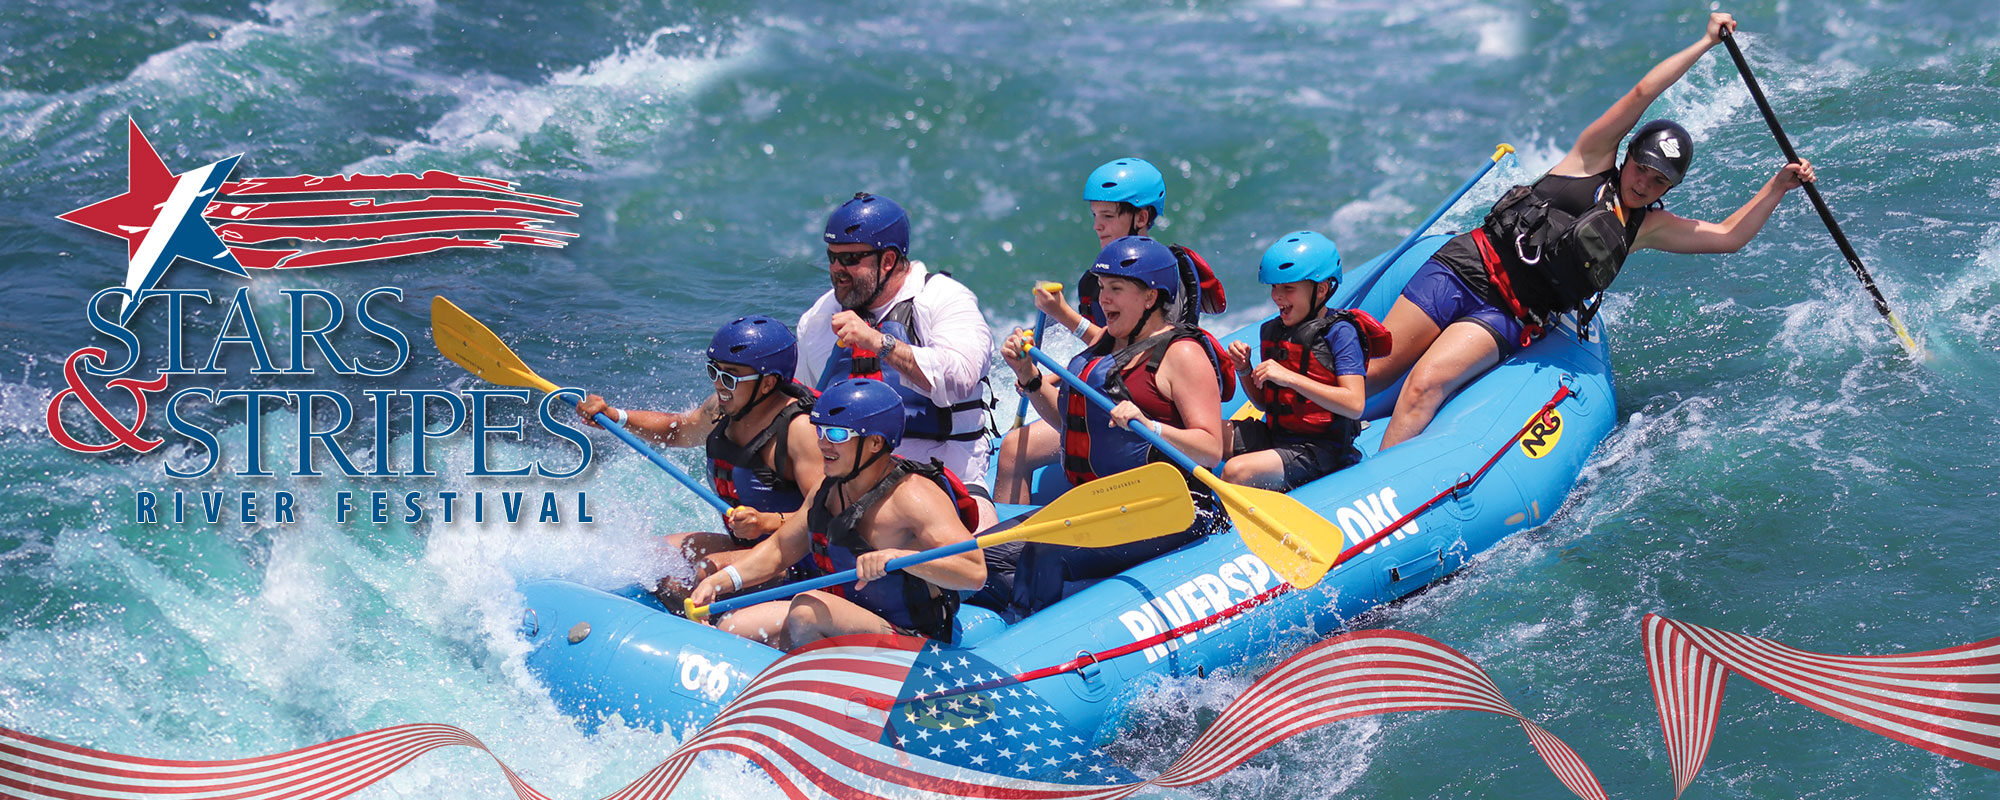 Join us at RIVERSPORT for the Stars & Stripes River Festival on June 24 and July 1!